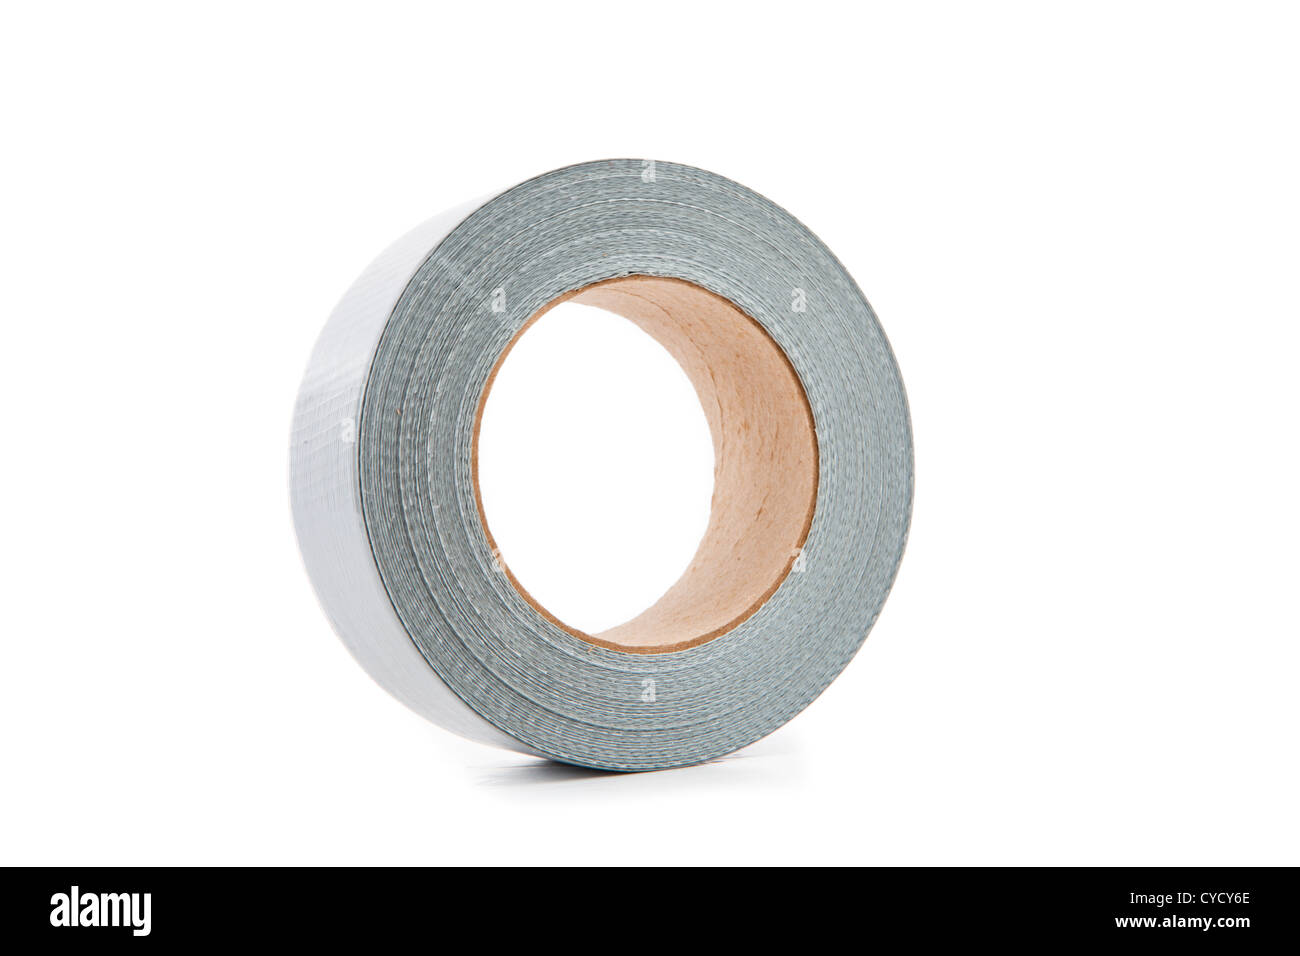 Unrolled adhesive tape Stock Photo